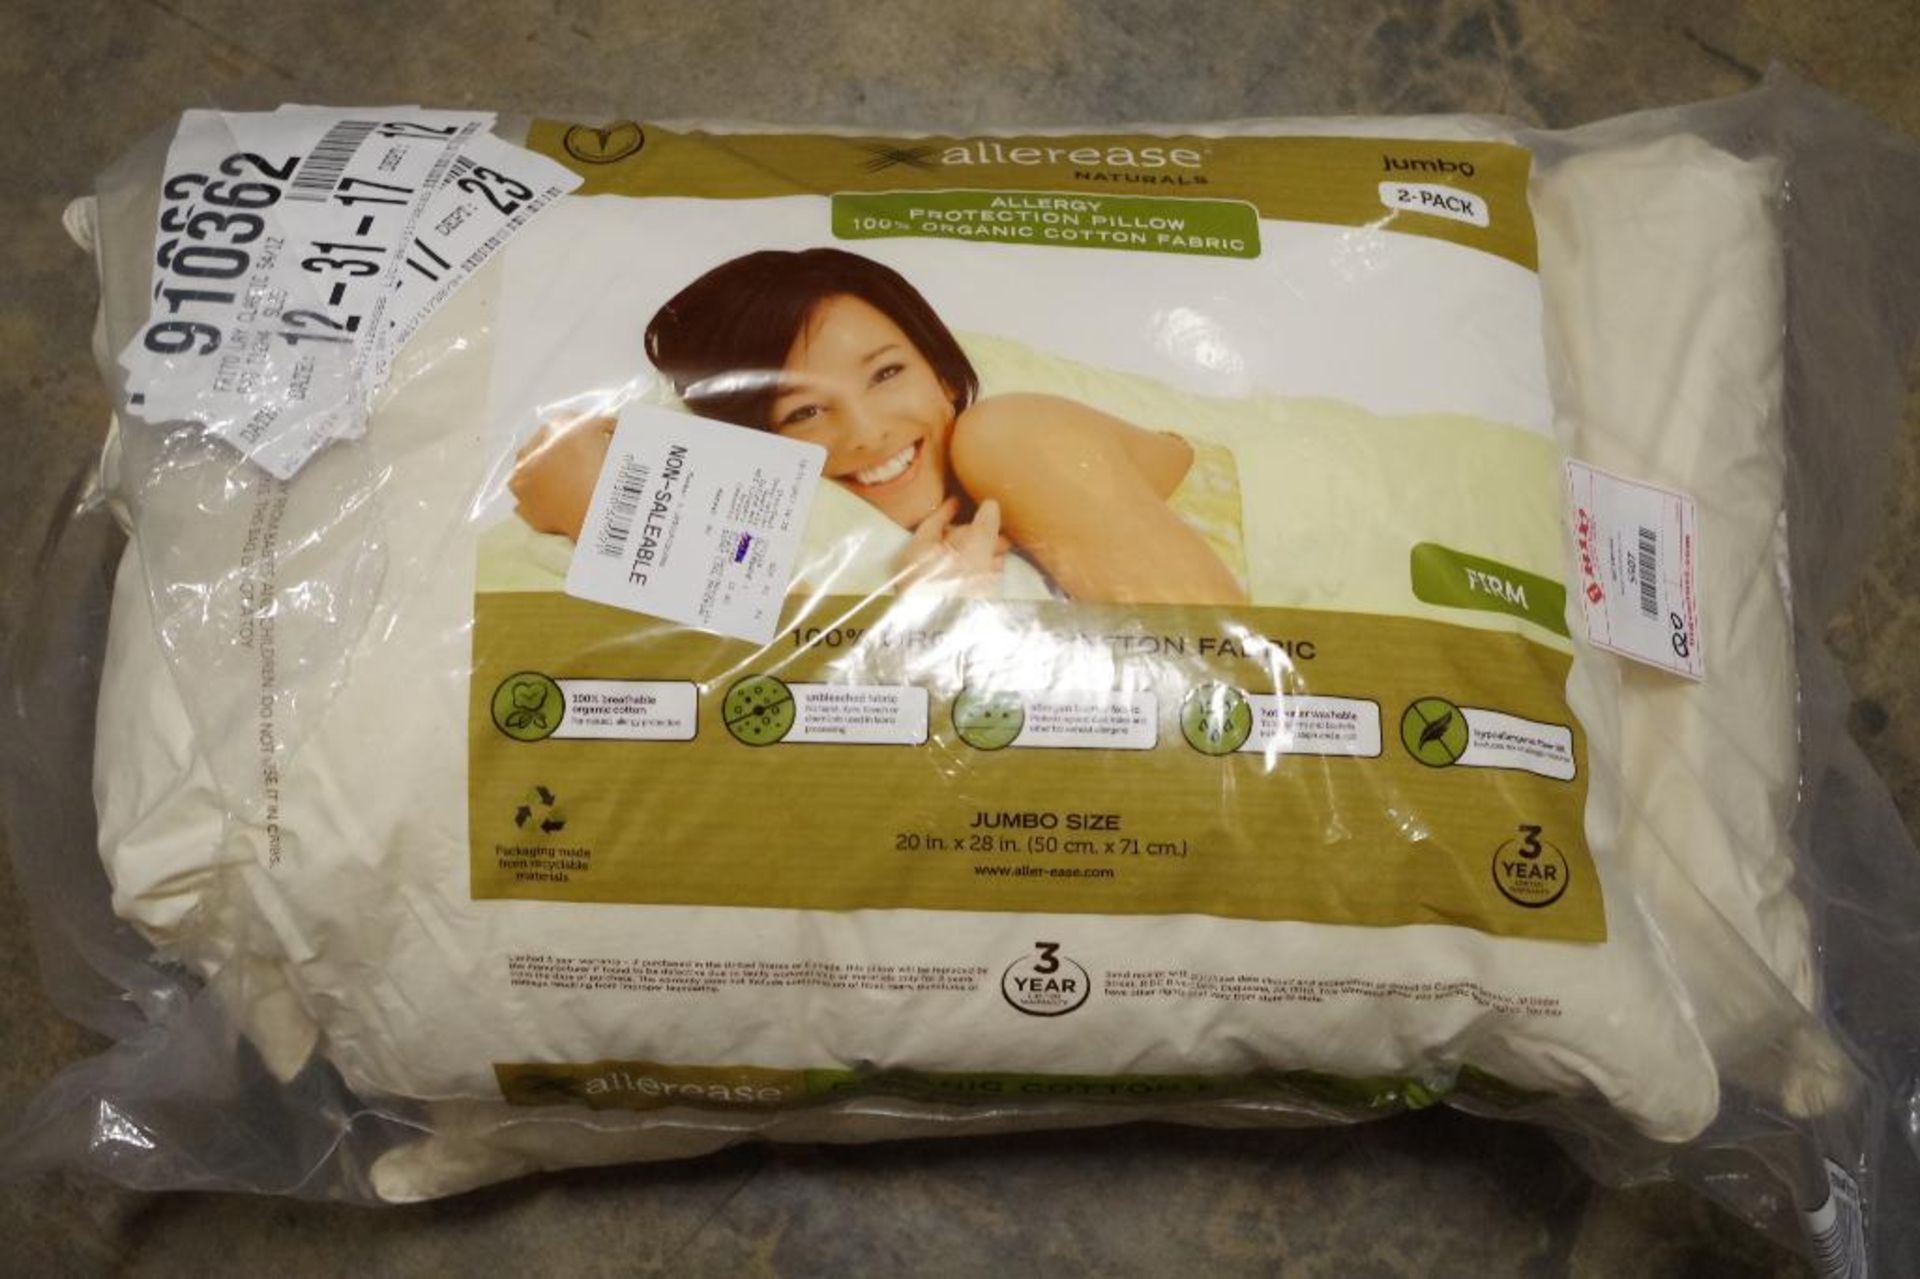 [2] ALLEREASE Jumbo Sized 100% Organic Cotton Fabric Pillows, Store Return - Image 2 of 3